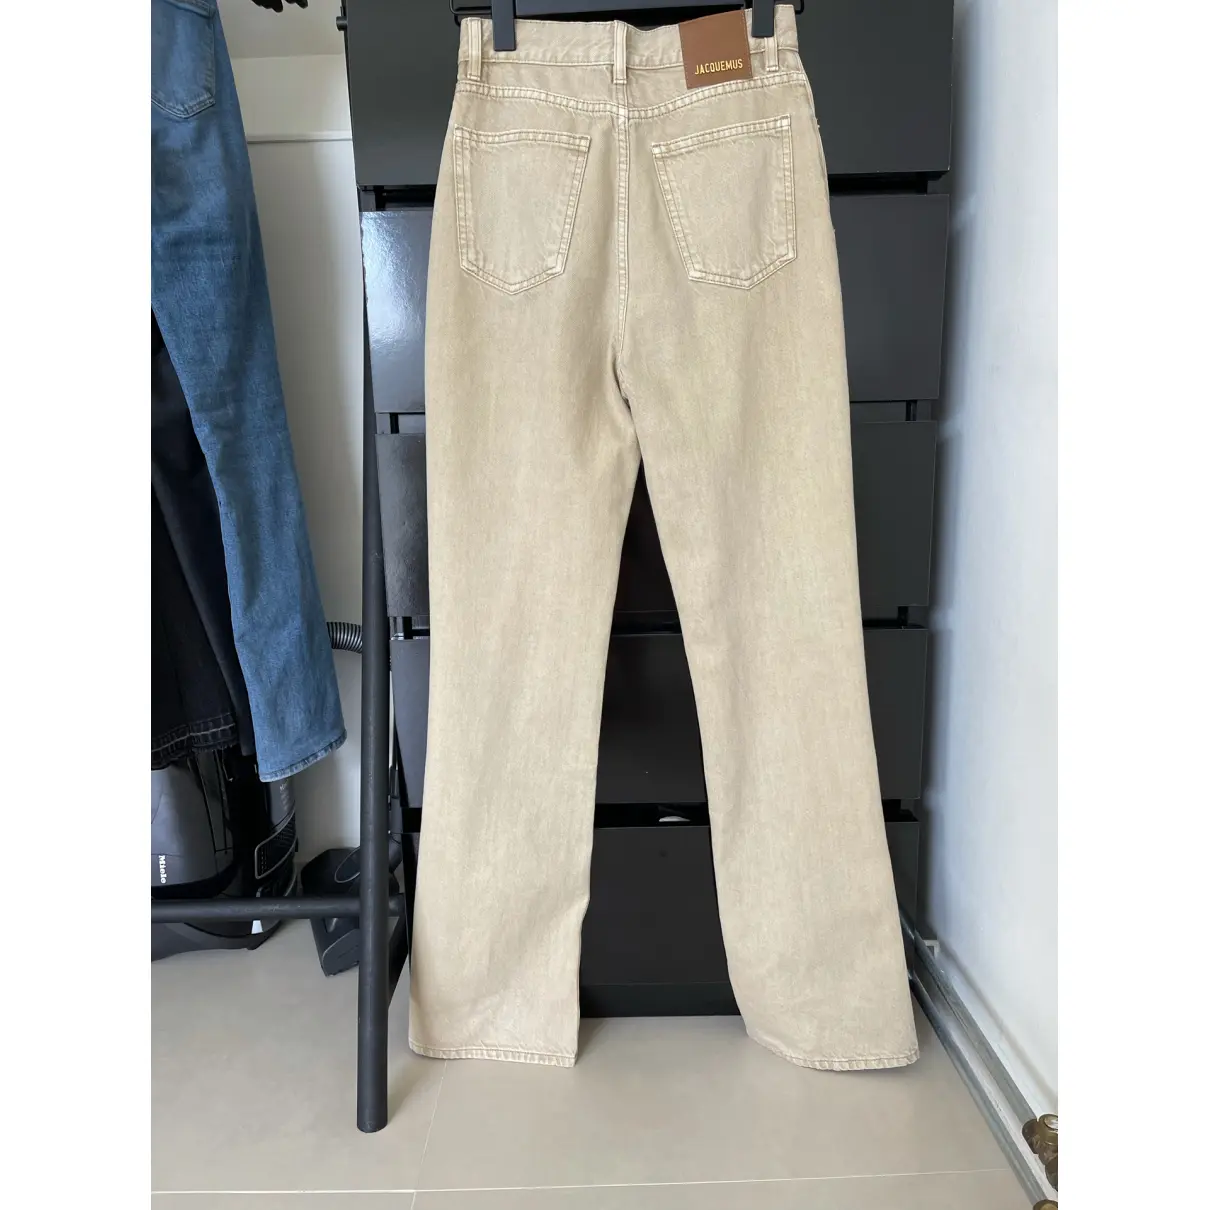 Buy Jacquemus Trousers online